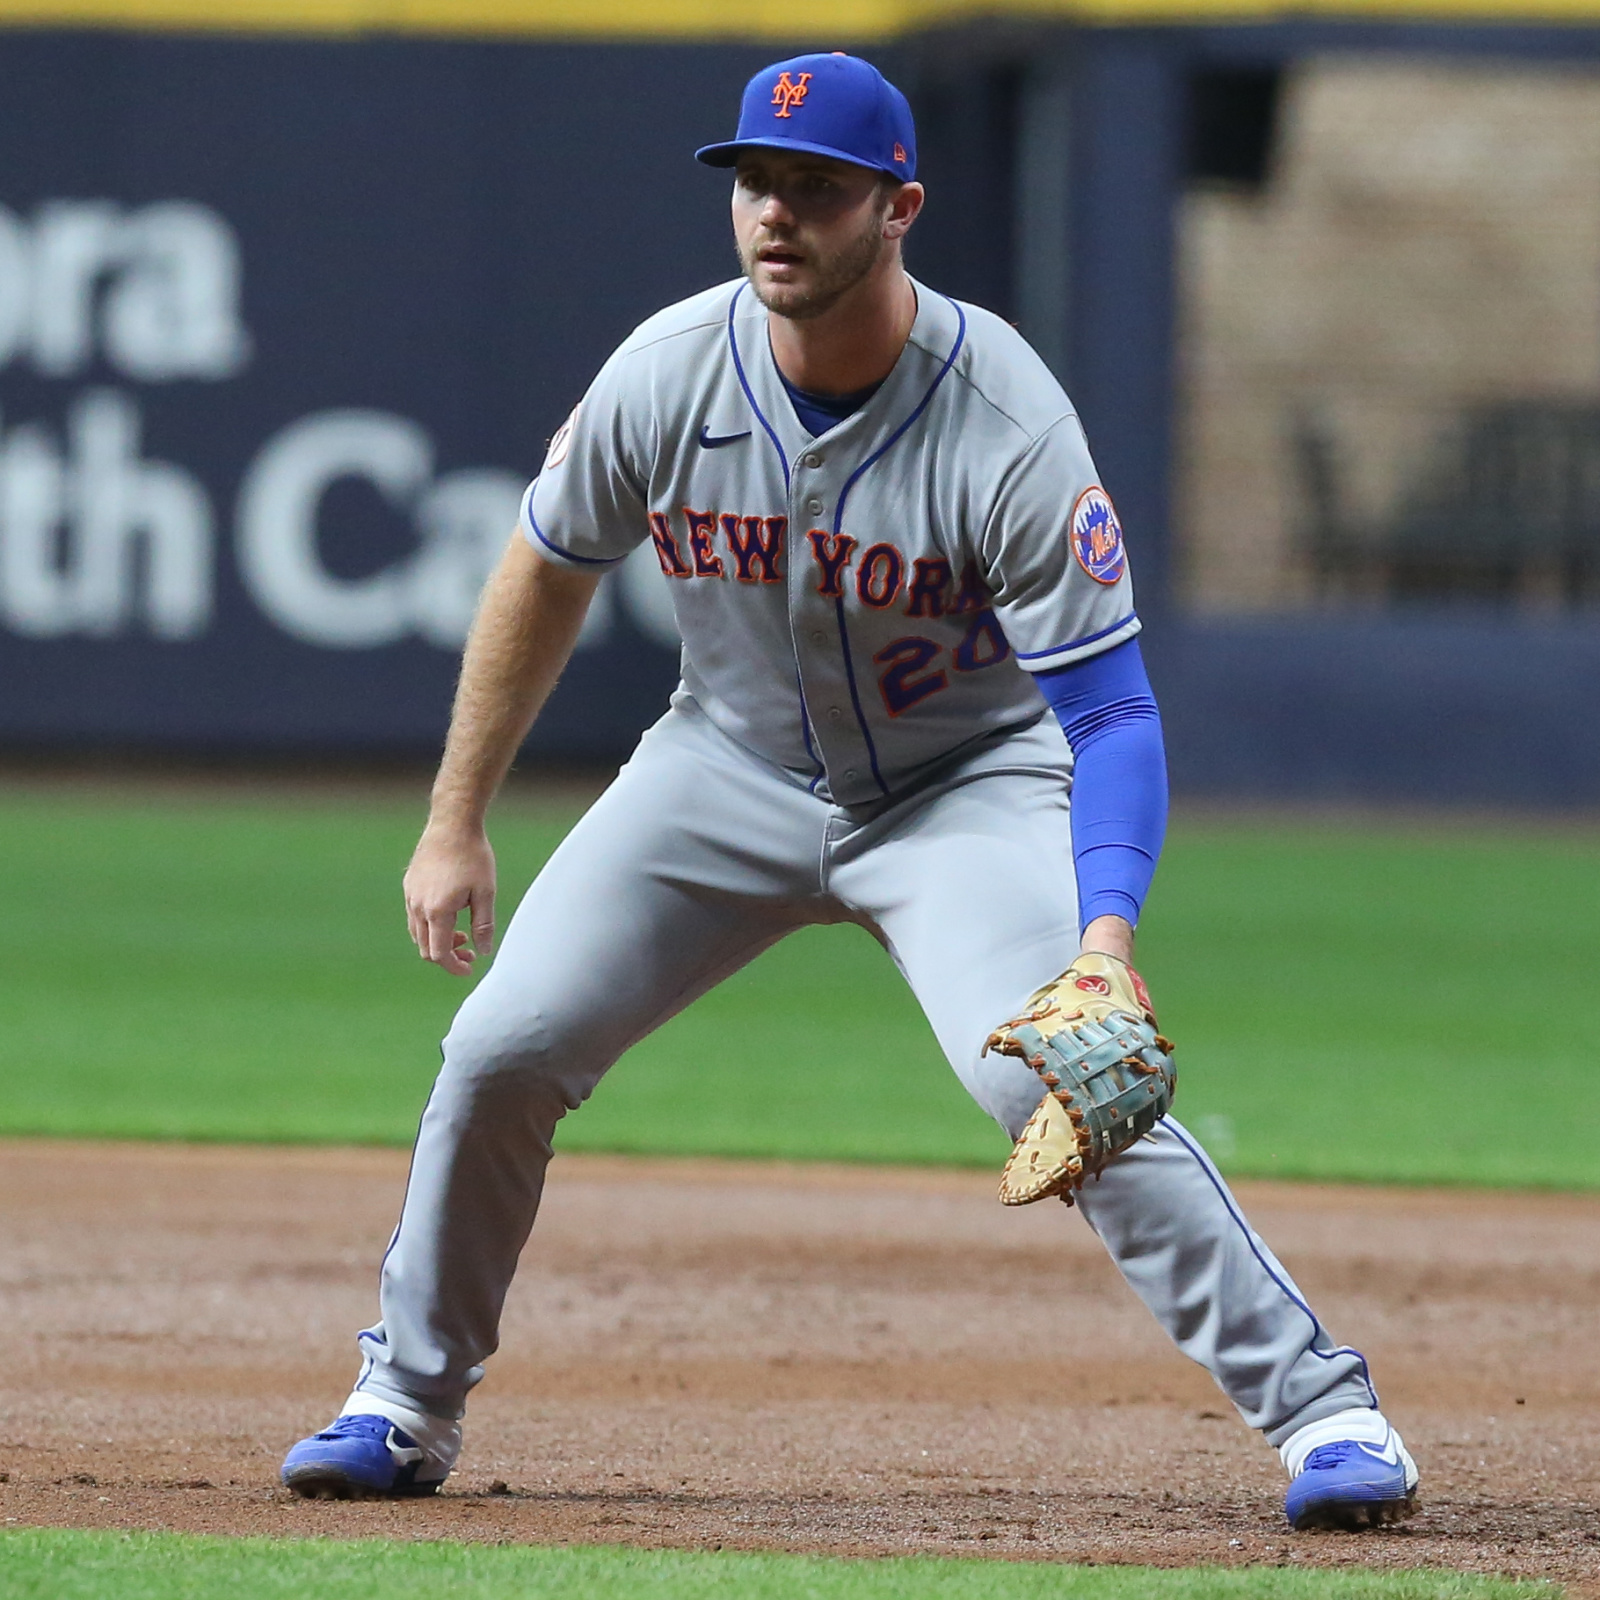 New York Mets draft Pete Alonso with pick No. 64